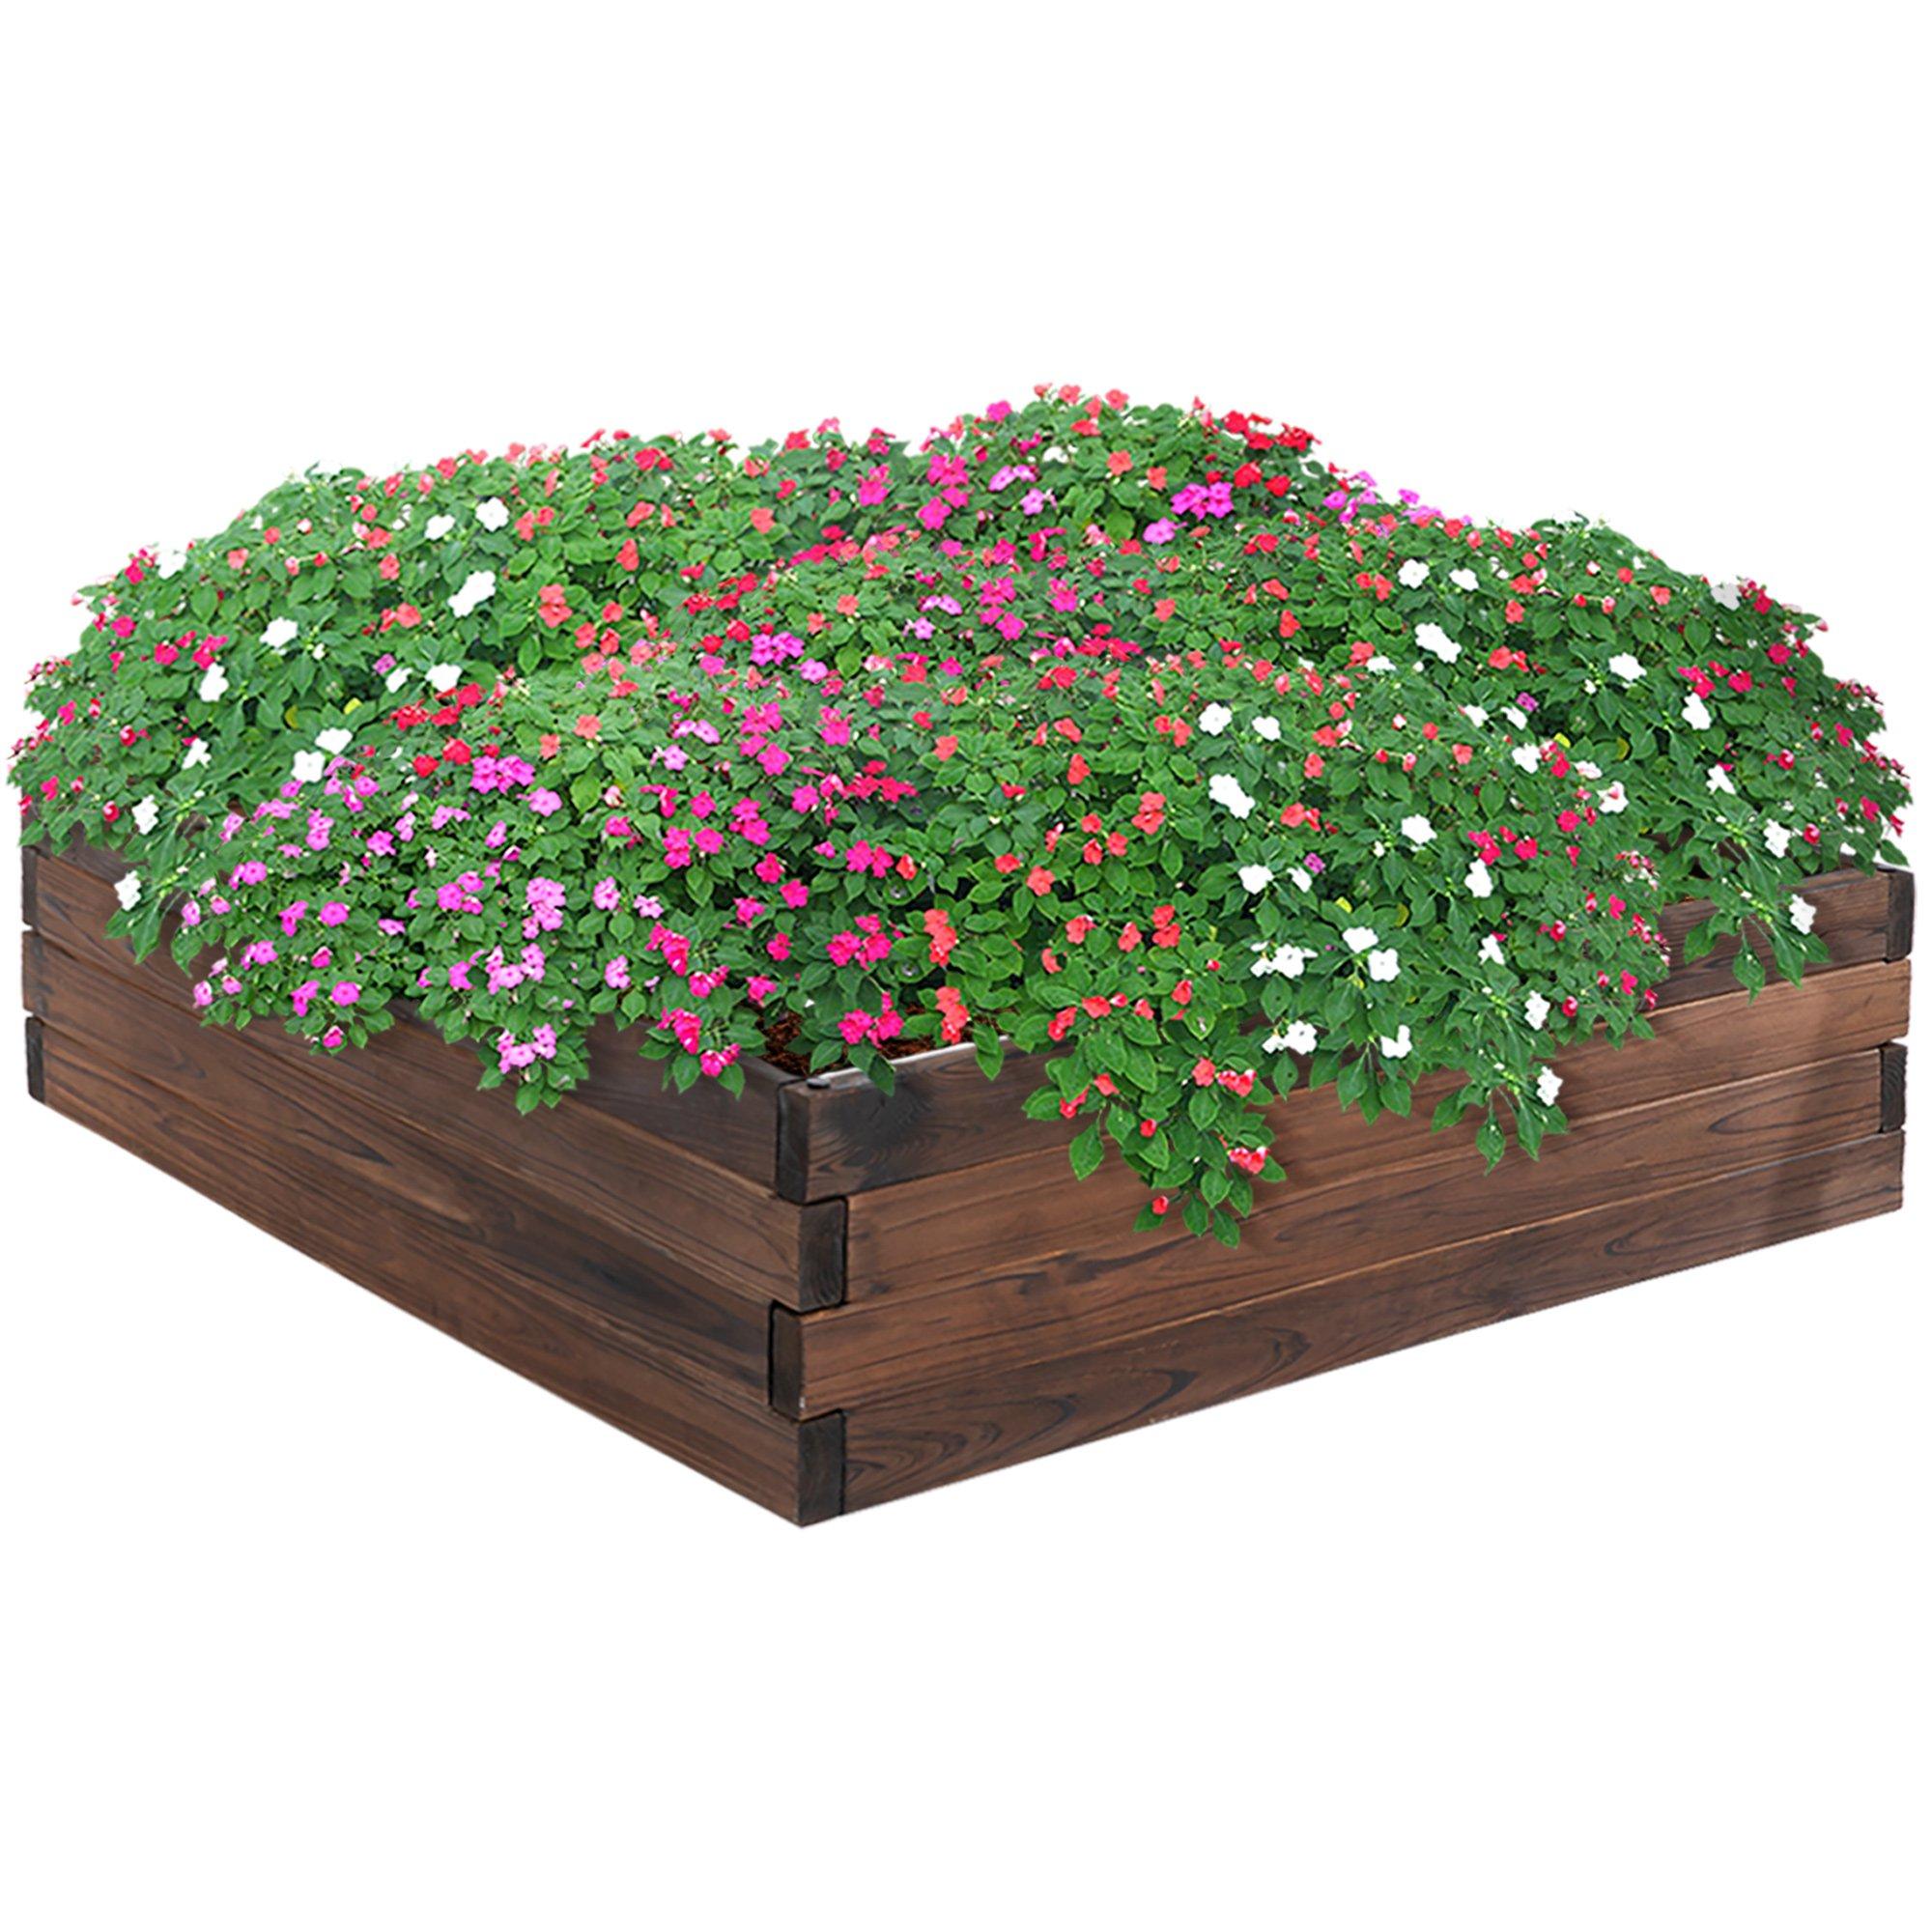 Wooden Raised Garden Bed Planter Grow Containers Flower Pot